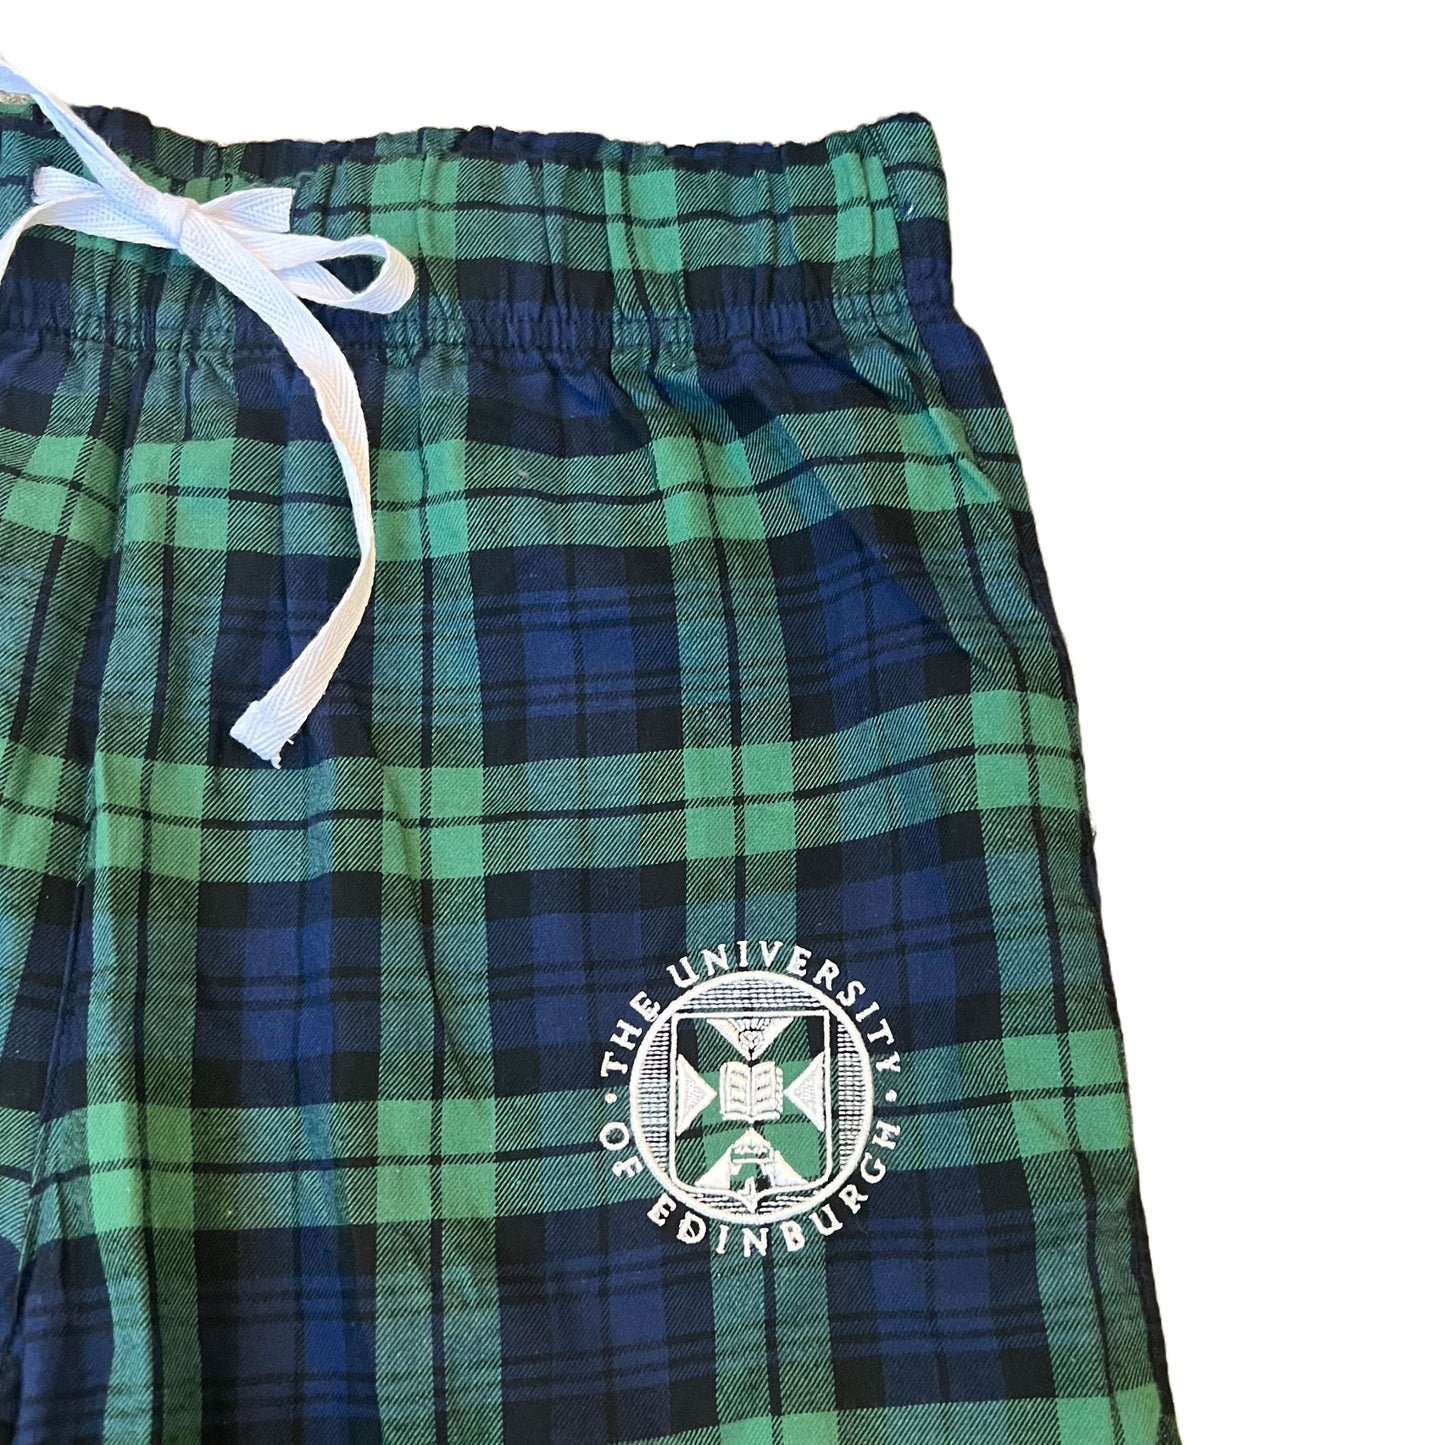 close up of navy and green tartan trousers with university crest embroidered in white